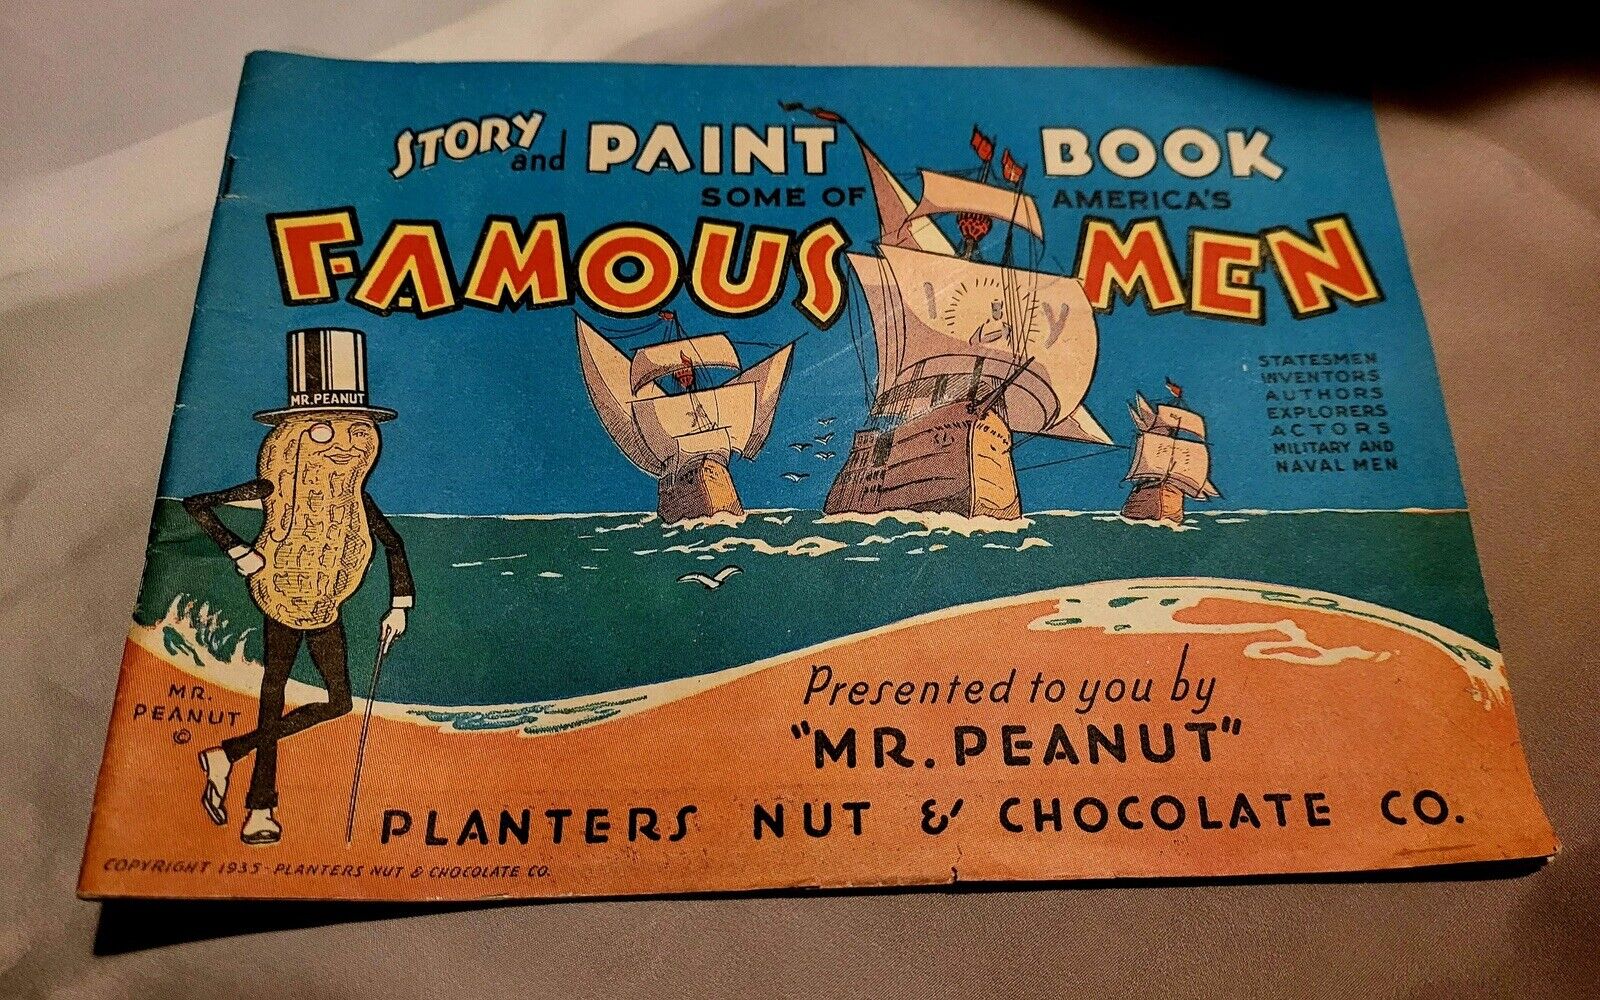 Some of America's Famous Men 1935 PLANTERS PEANUT STORY AND PAINT BOOK